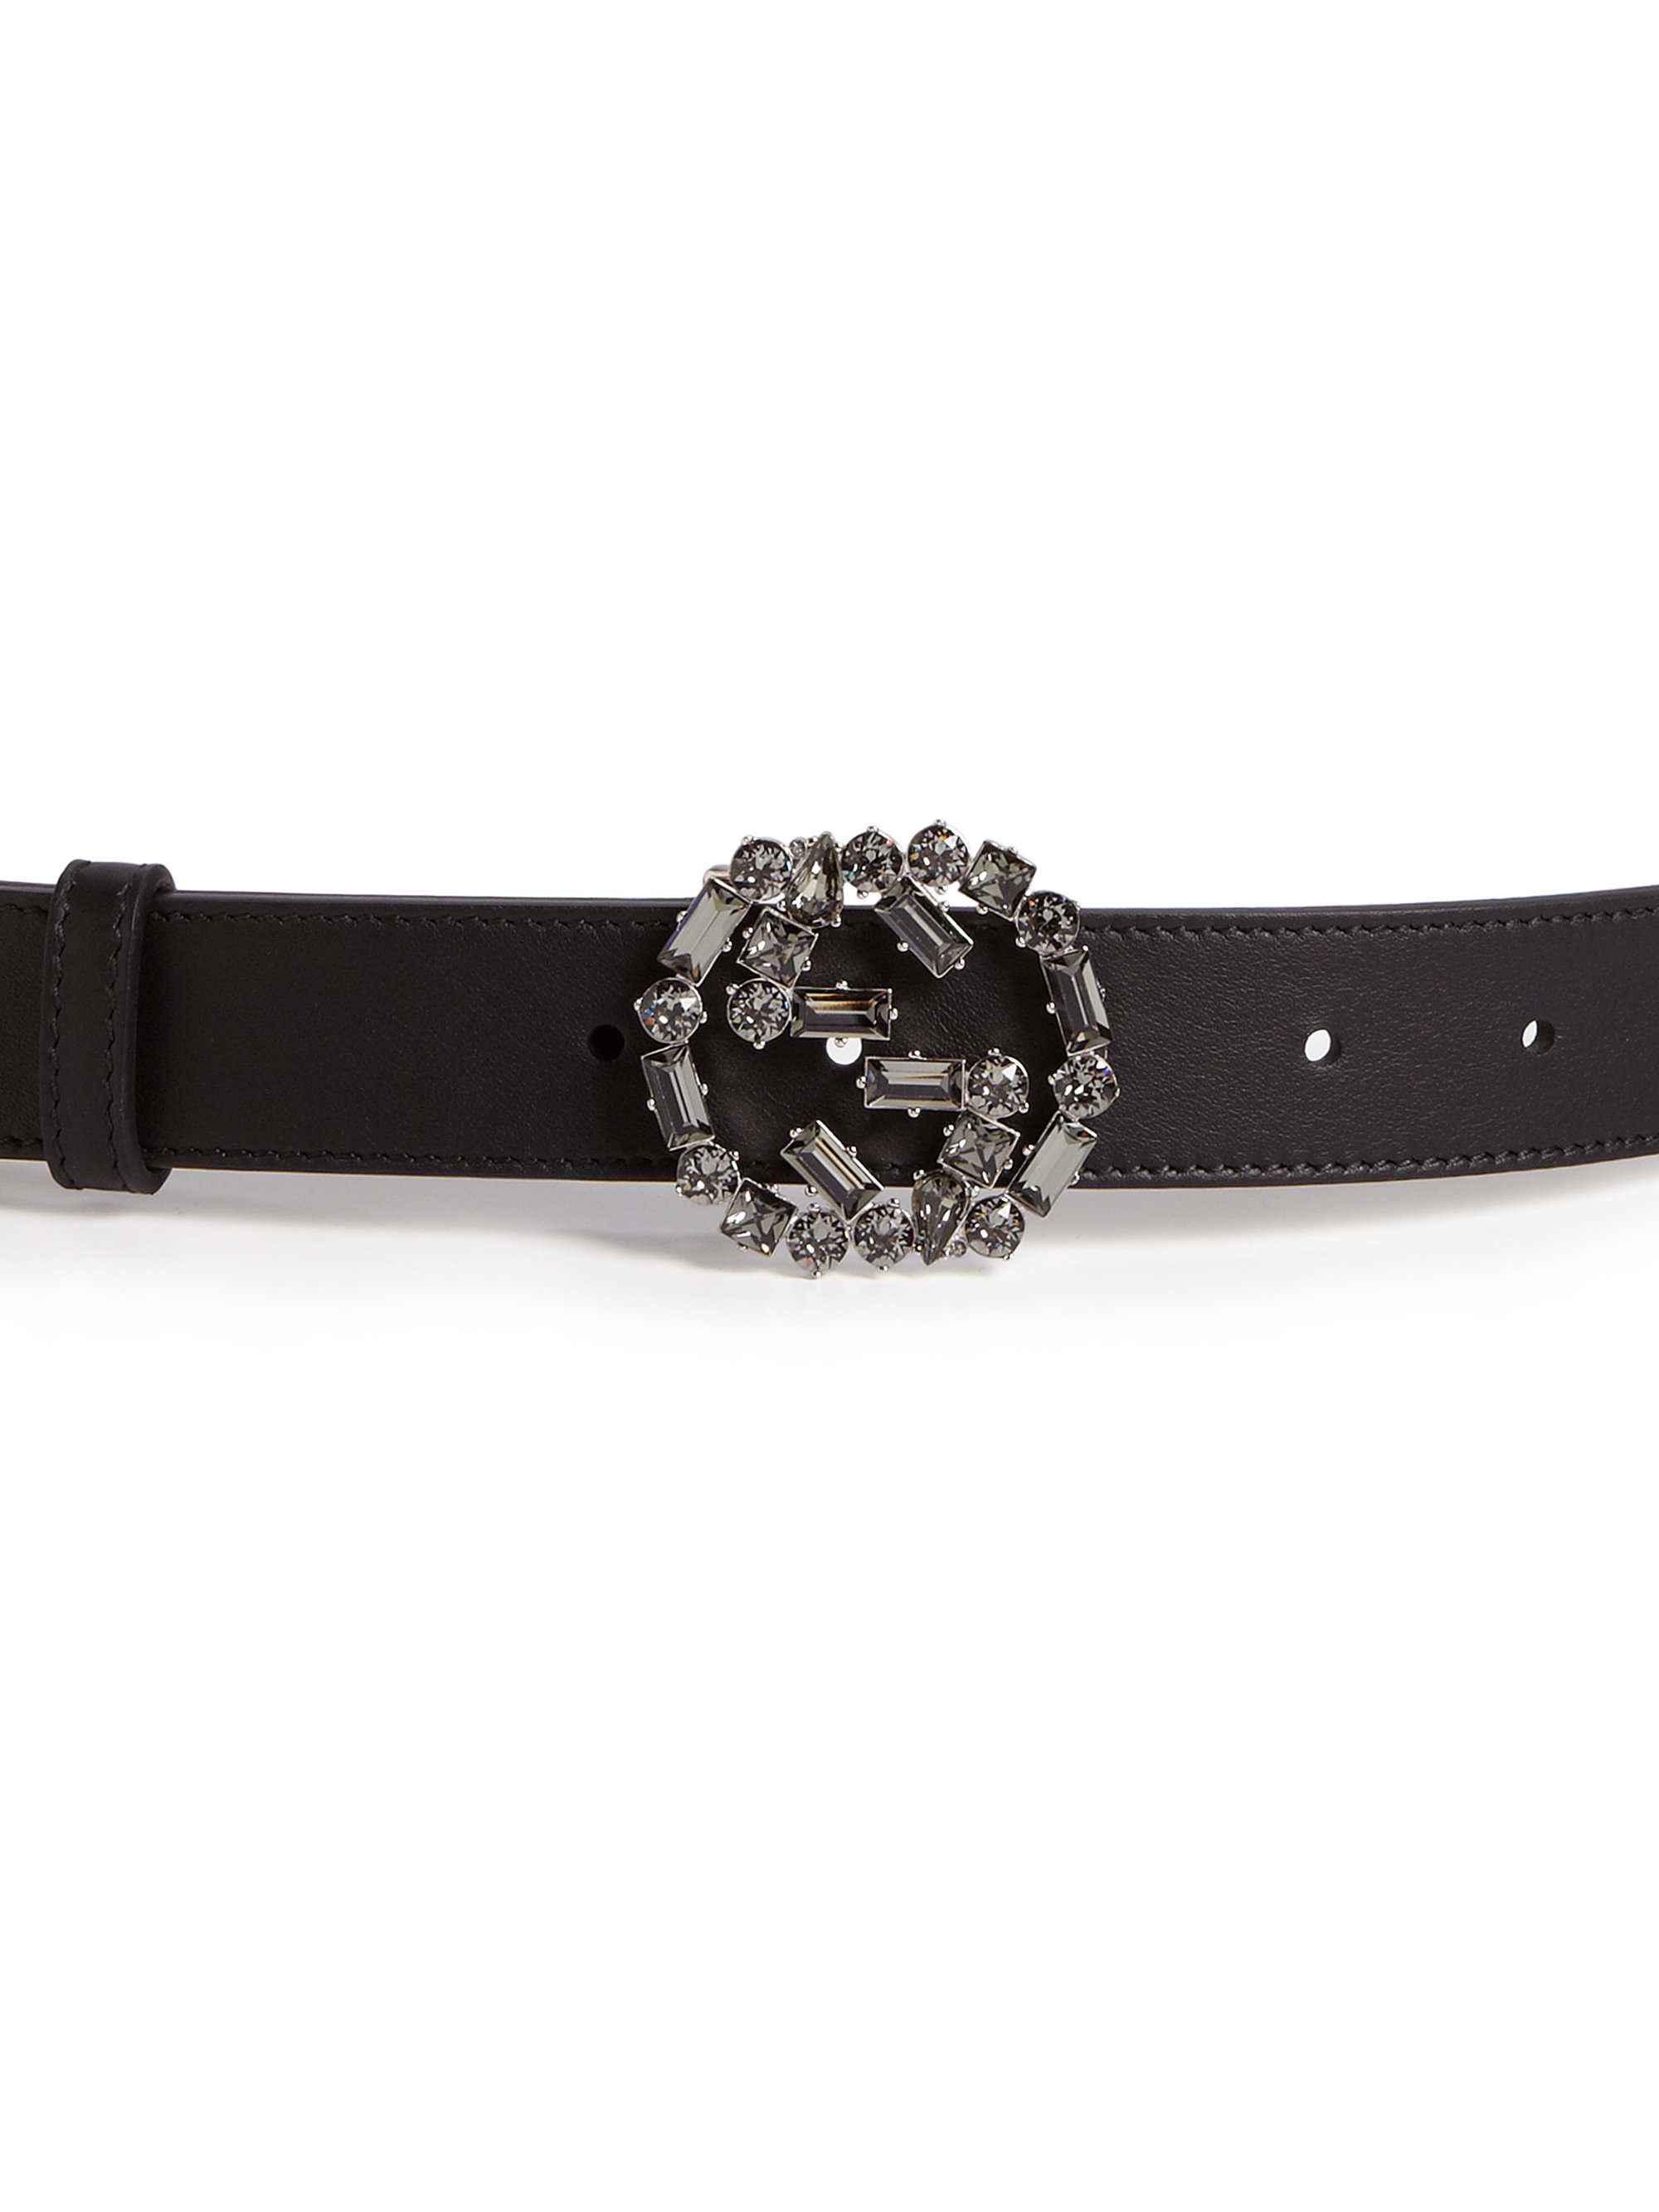 Gucci Moon Crystal Leather Belt in Black - Lyst